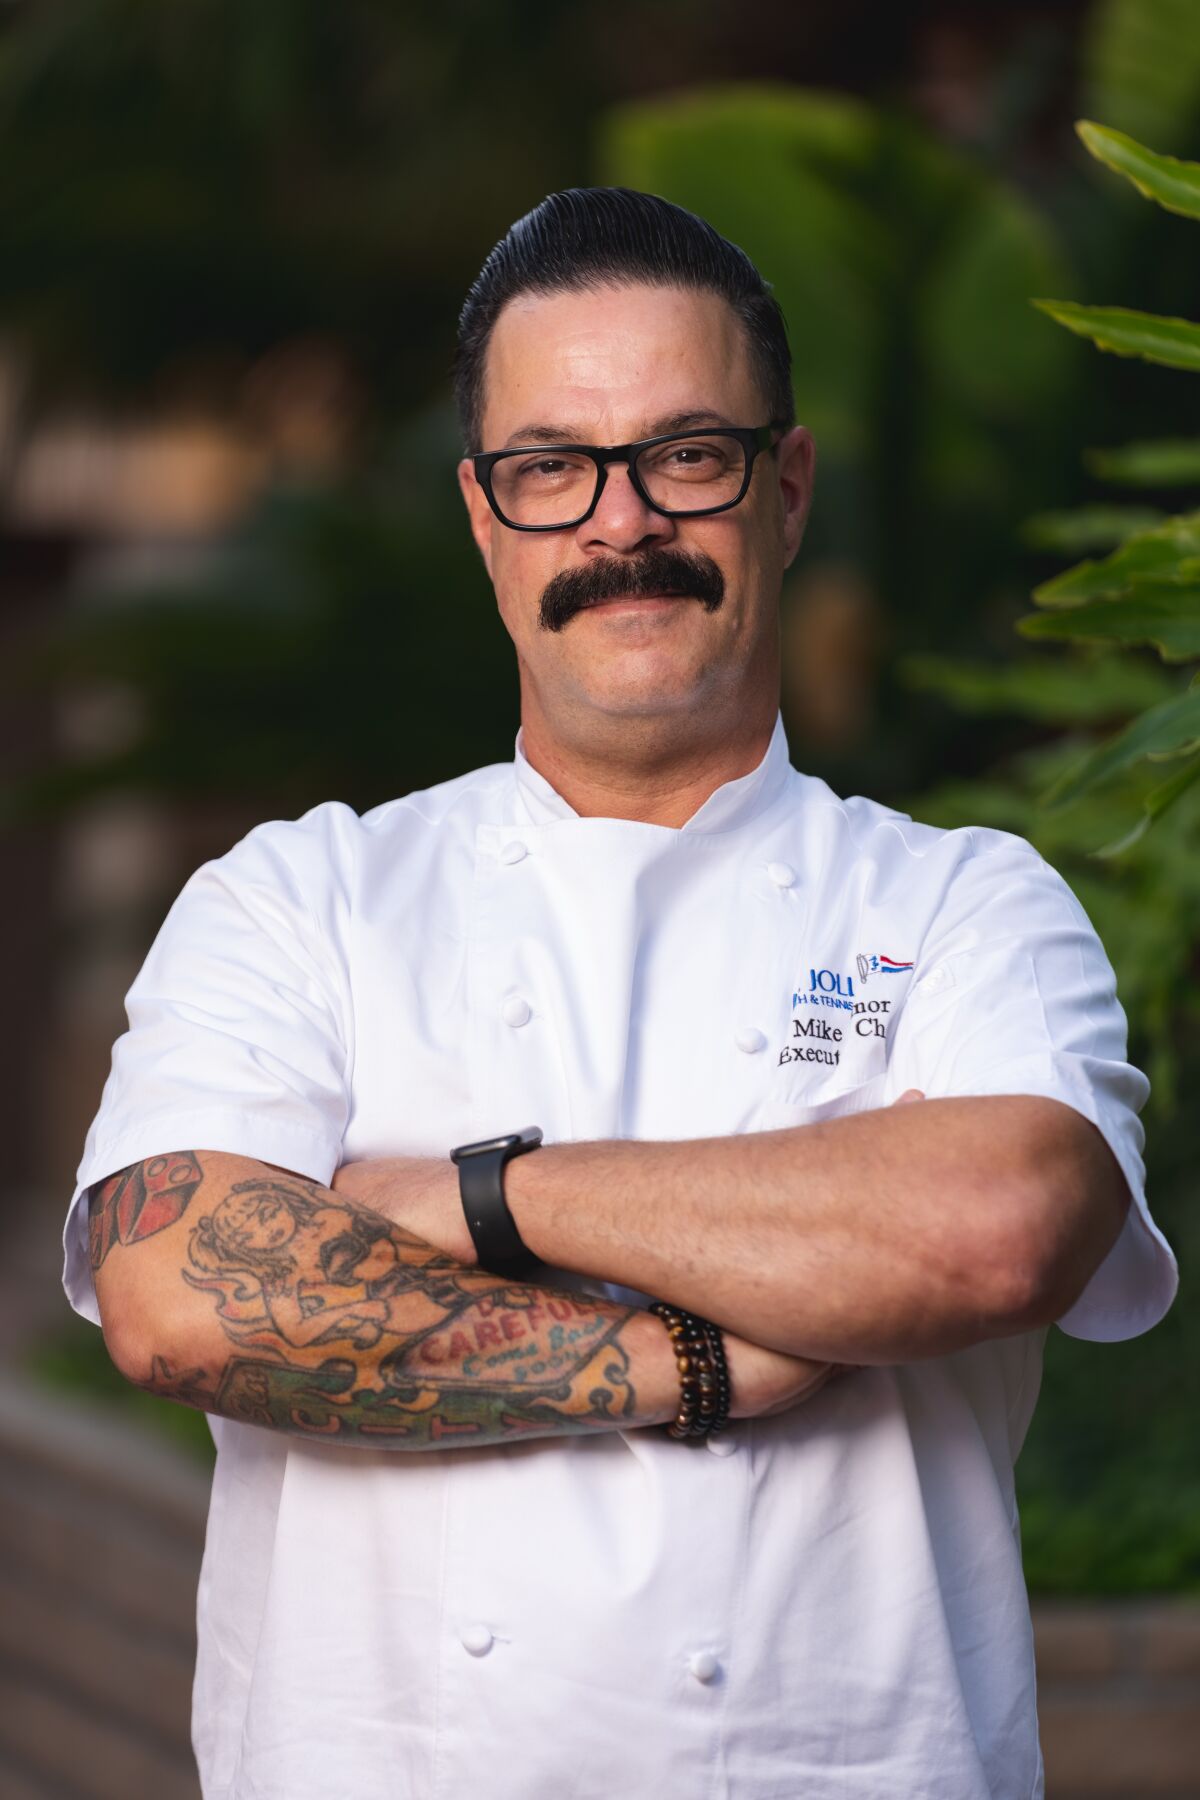 Executive chef Mike Minor of The Marine Room